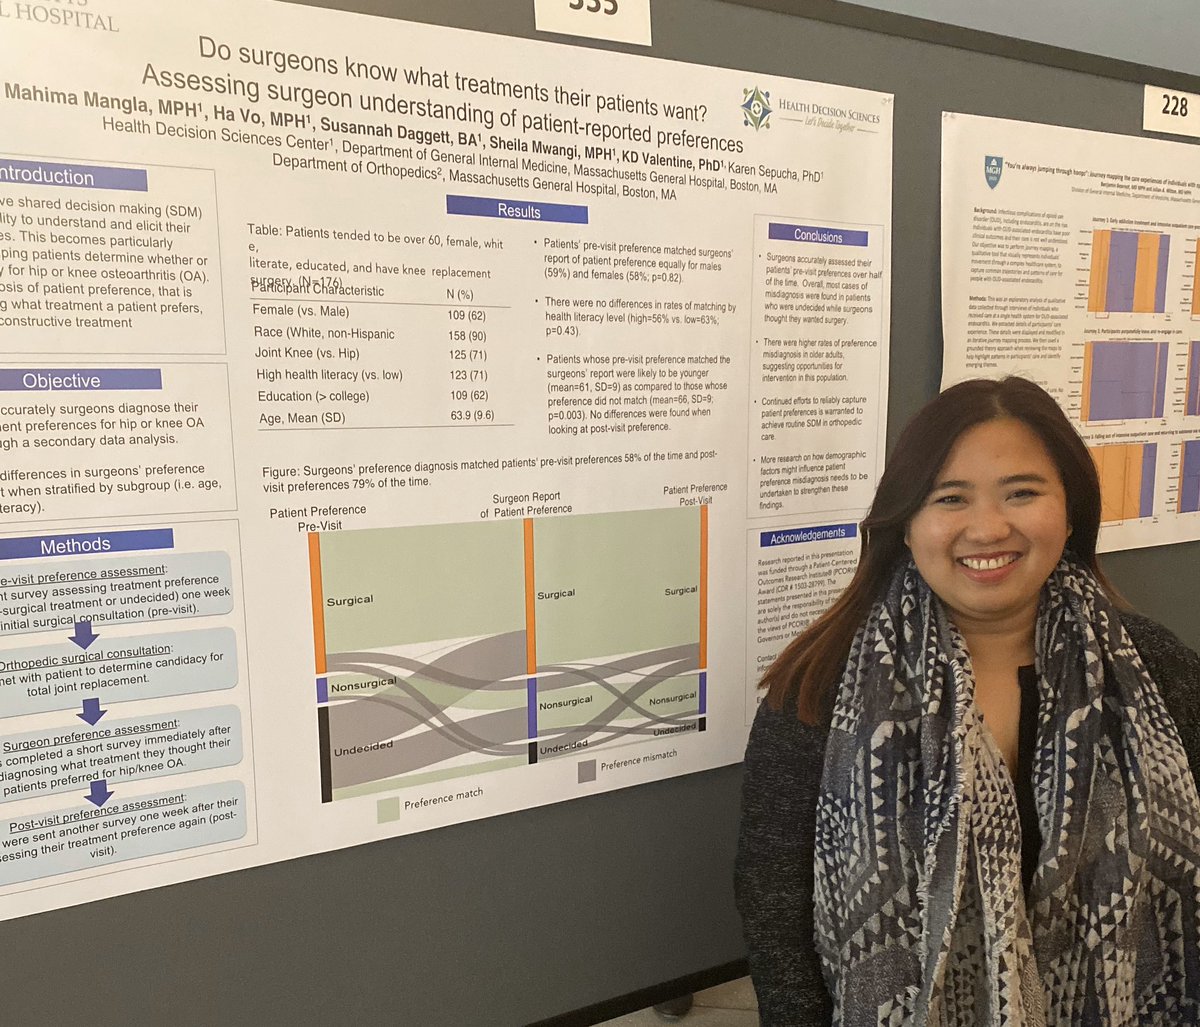 Our team presented some of our research today at MGH #ClinicalResearchDay! It was great to introduce some new data and catch up with colleagues. @MassGeneralNews @MonganInstitute